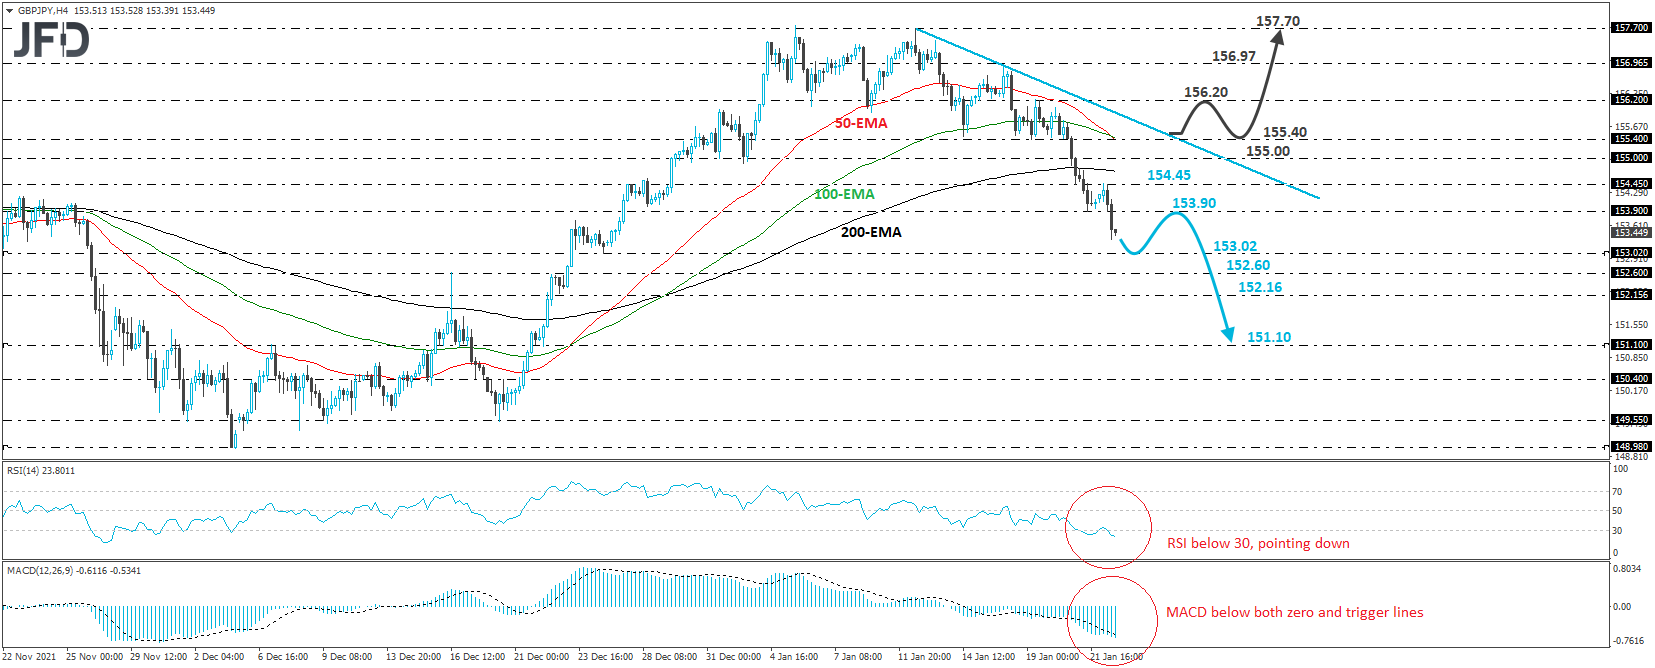 GBP/JPY 4-hour chart technical analysis.